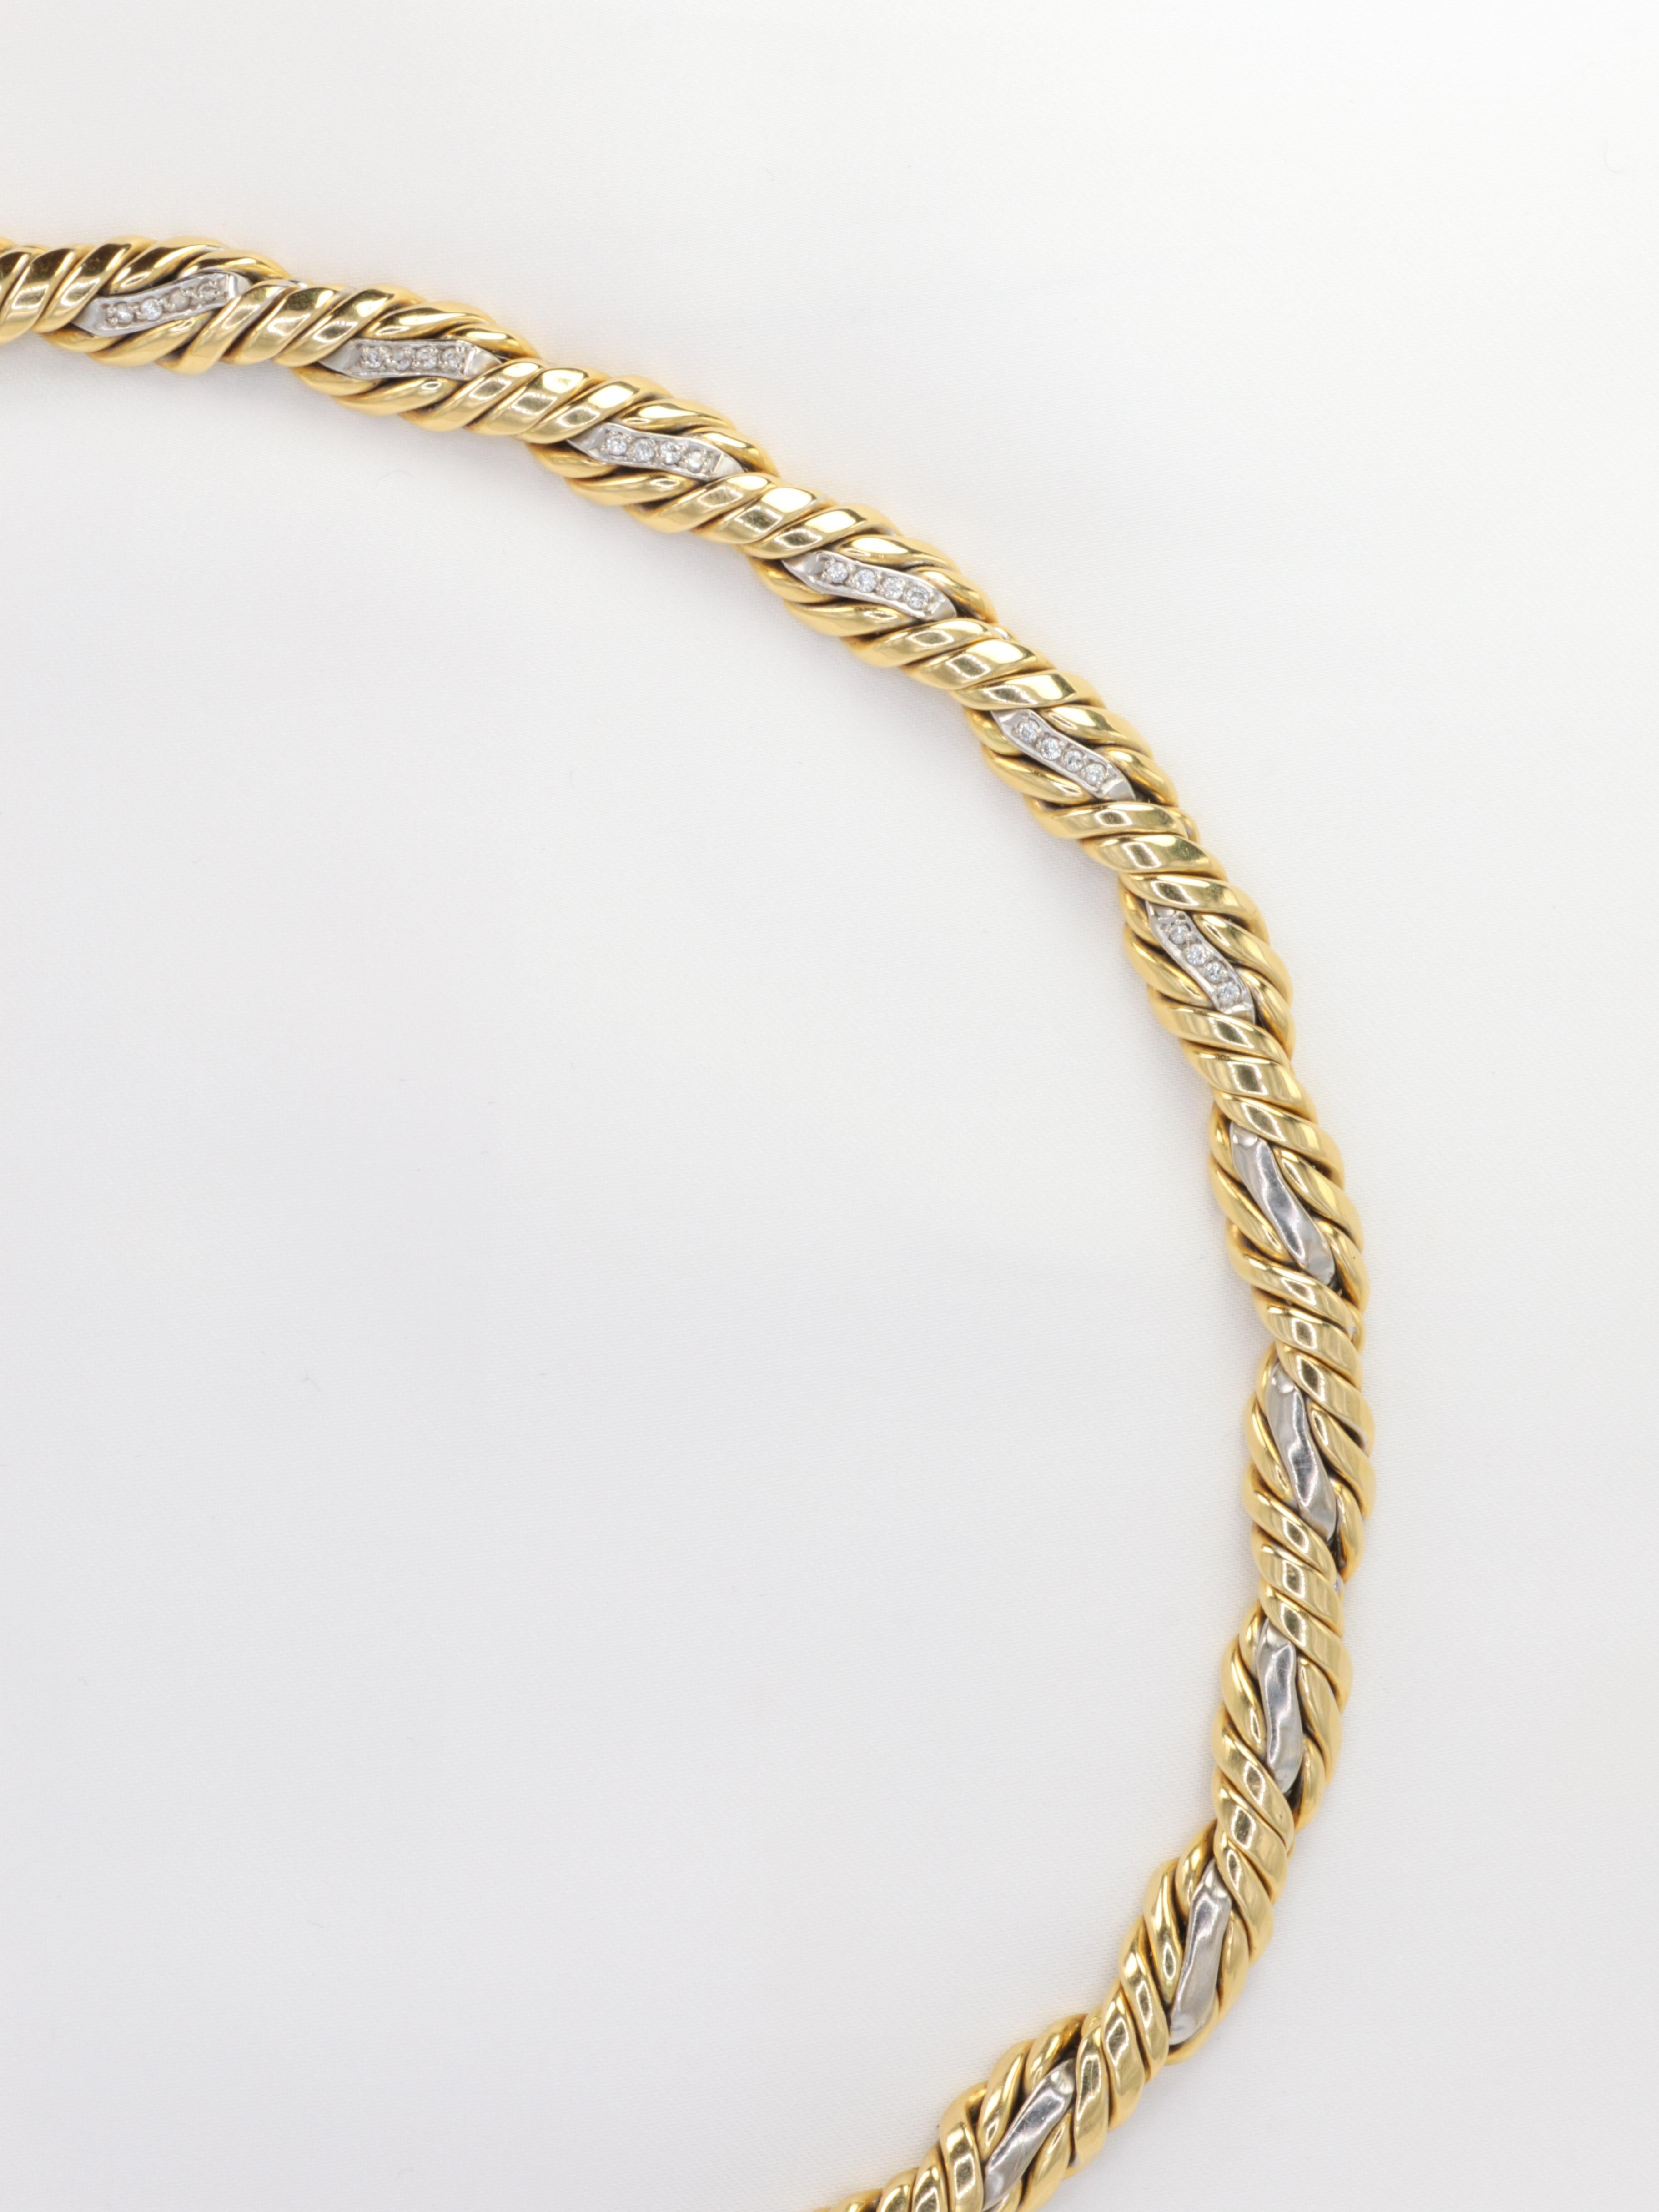 18Kt (750°/°°) yellow and white gold rope necklace formed of braided gold wires. In the center of the necklace, the white gold part is set with small 8x8 diamonds.
This necklace was purchased from Bucherer in Lugano in the 1980's. There is a trace